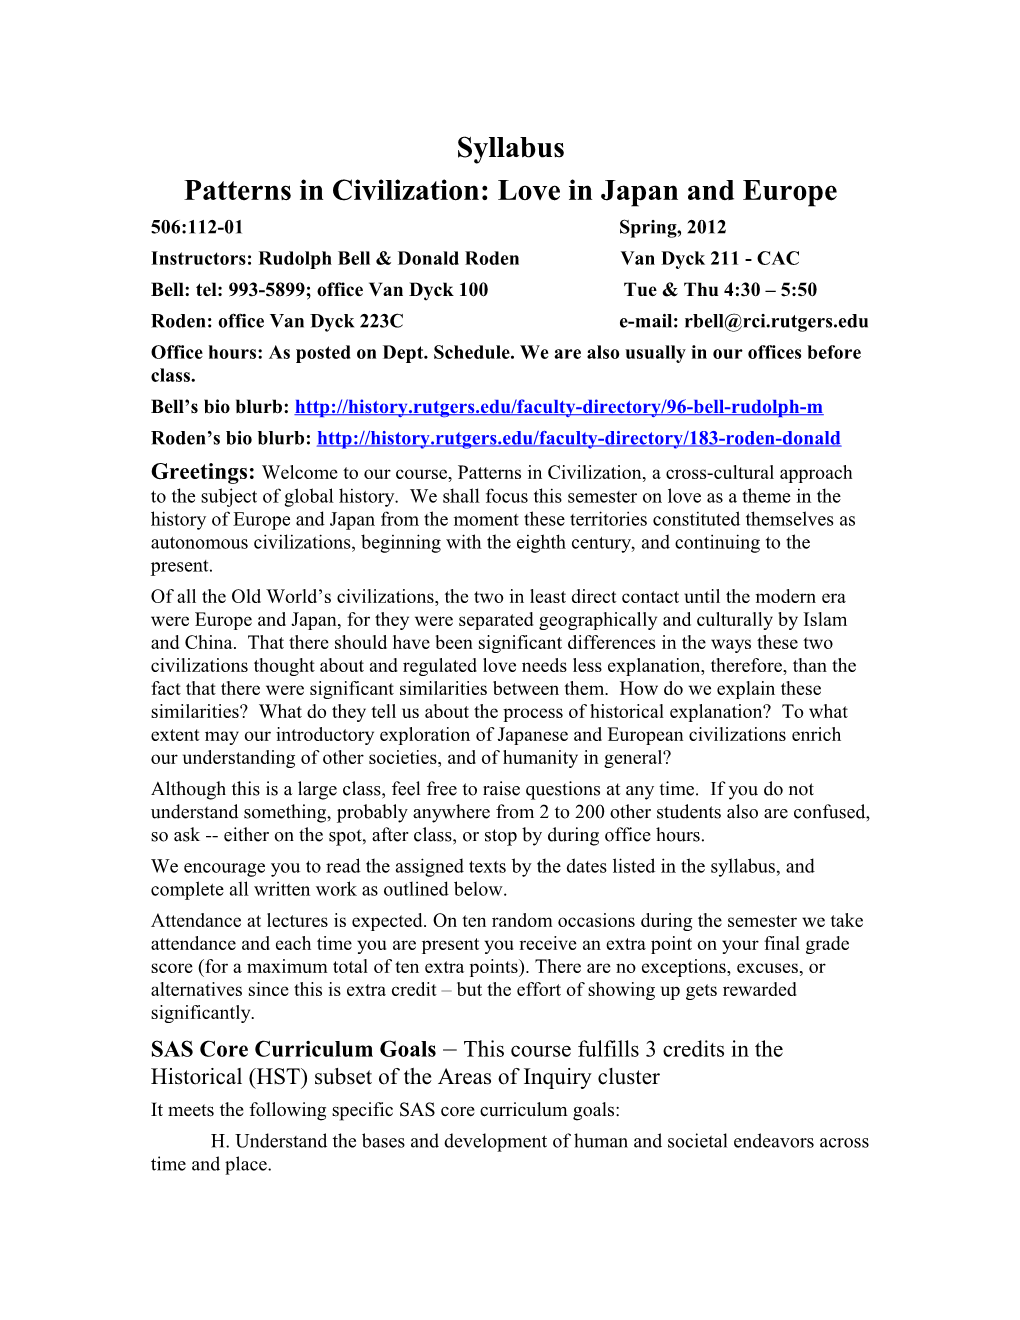 Patterns in Civilization: Love in Japan and Europe